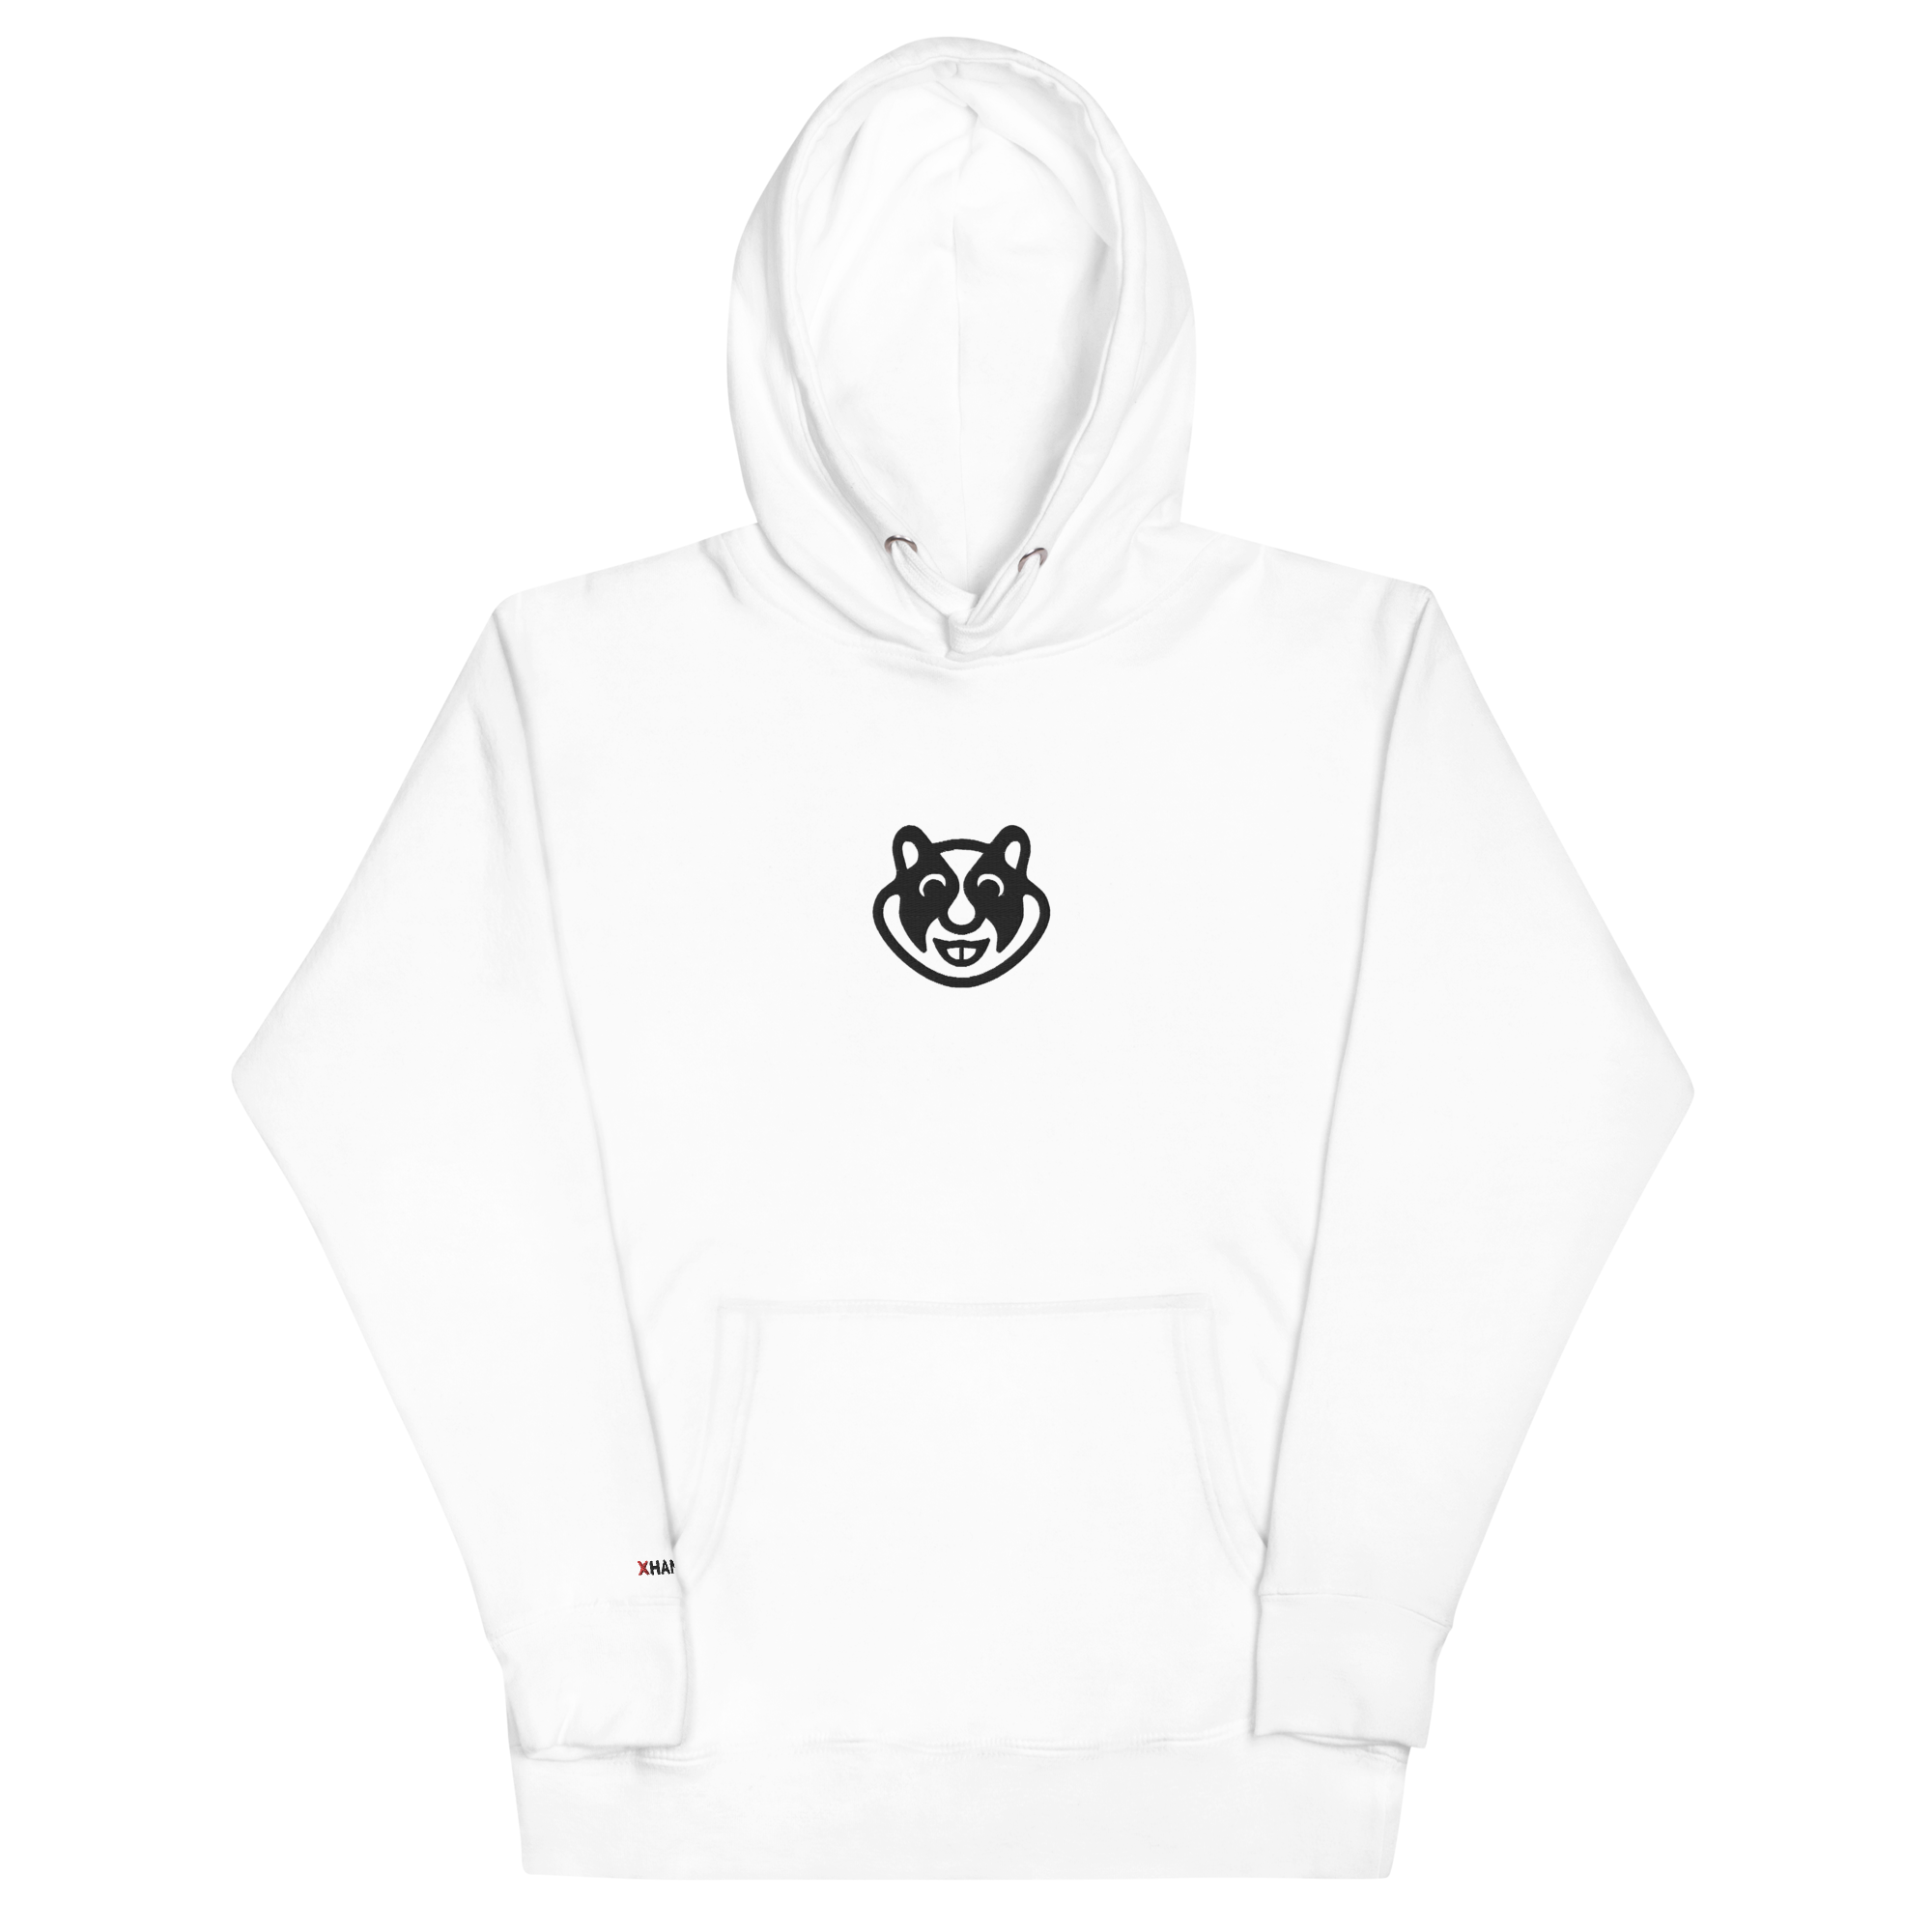 xHamster Unisex Hoodie (Mascot Embroidery) White